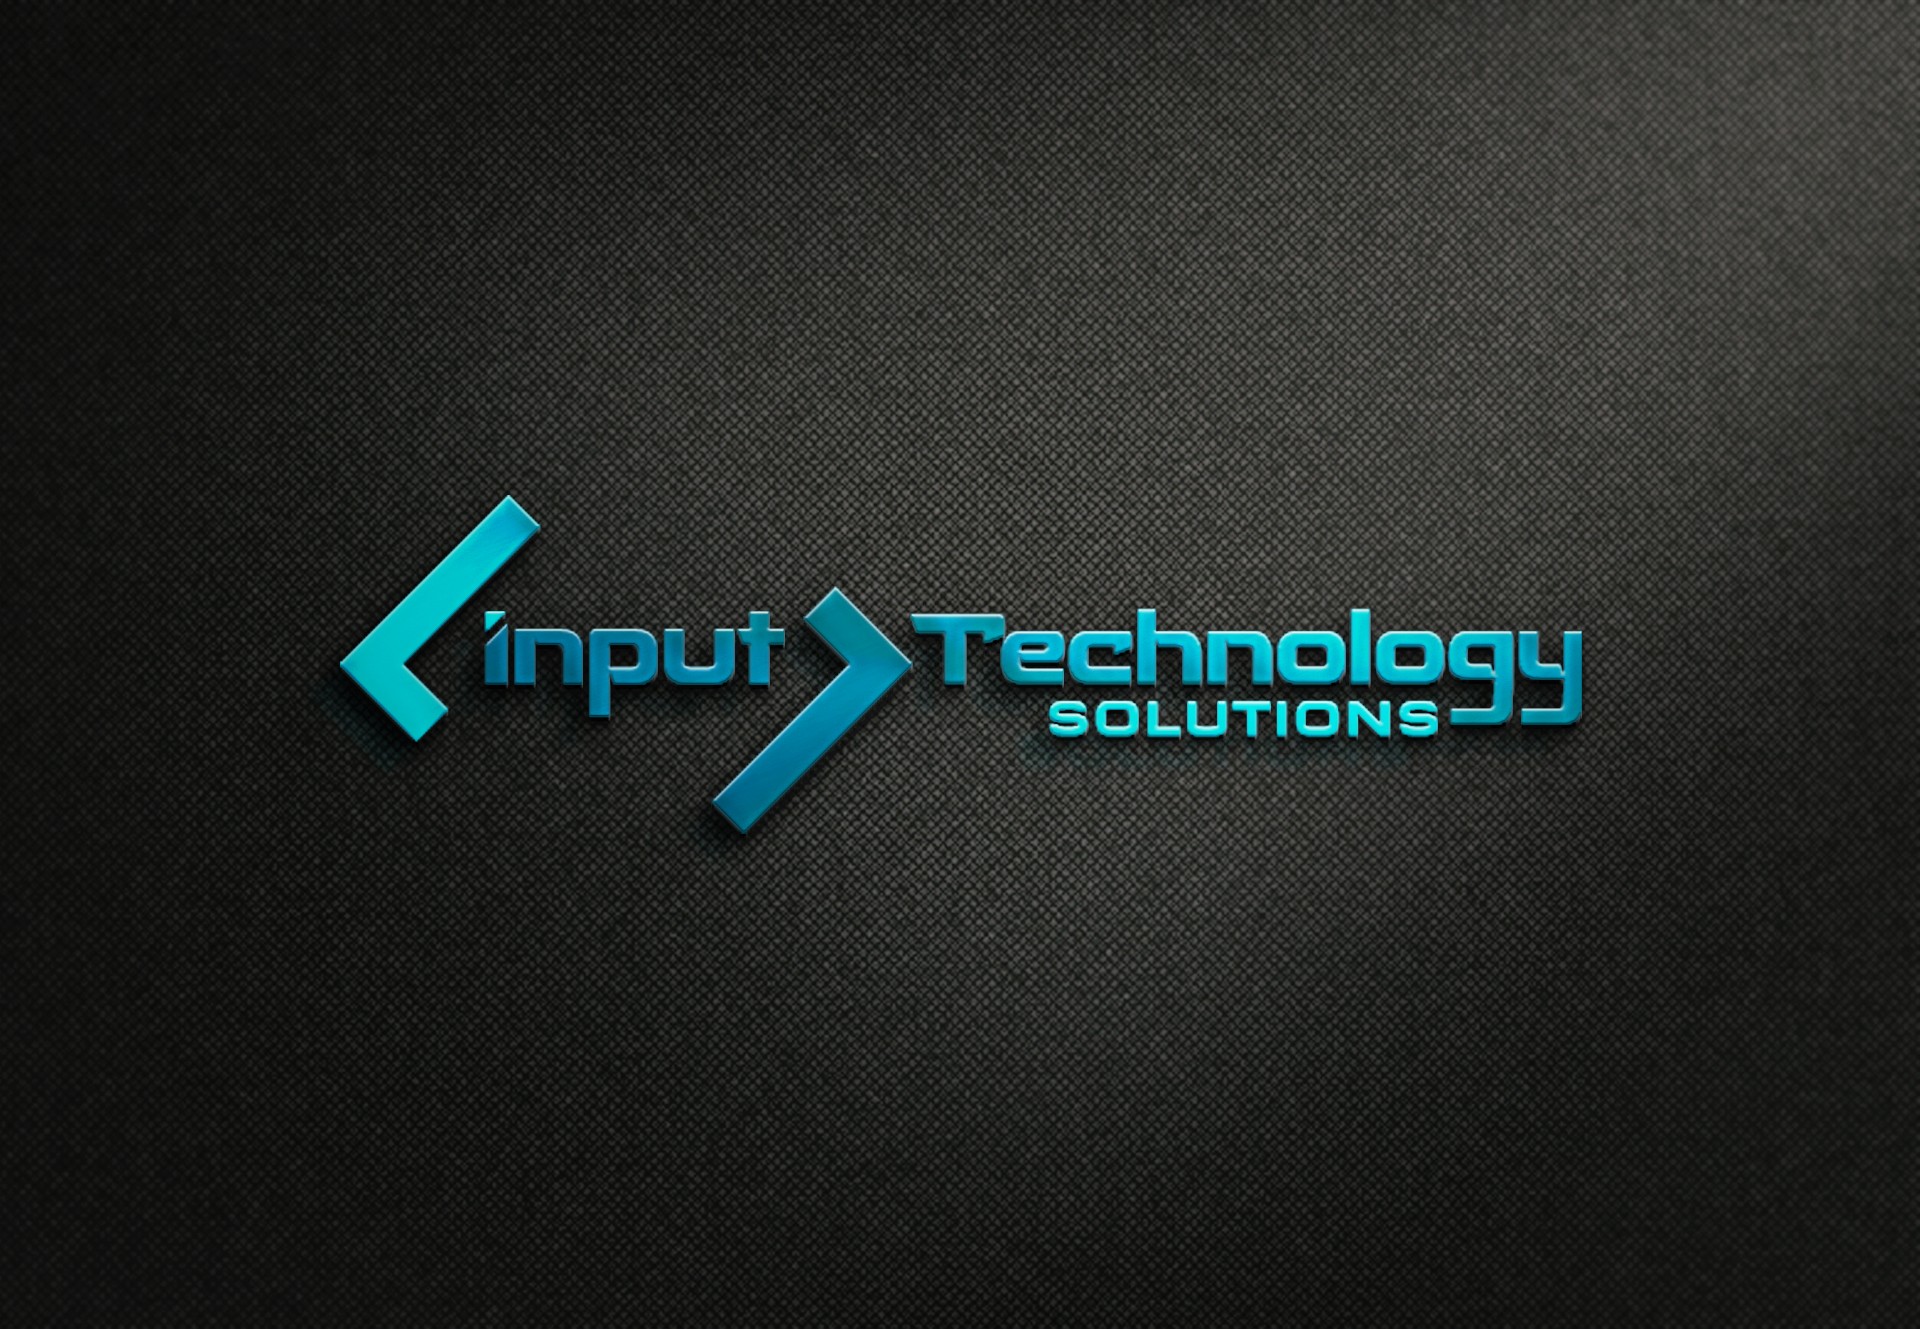 Remote Administrative Assistant Needed at INPUT Technology Solution